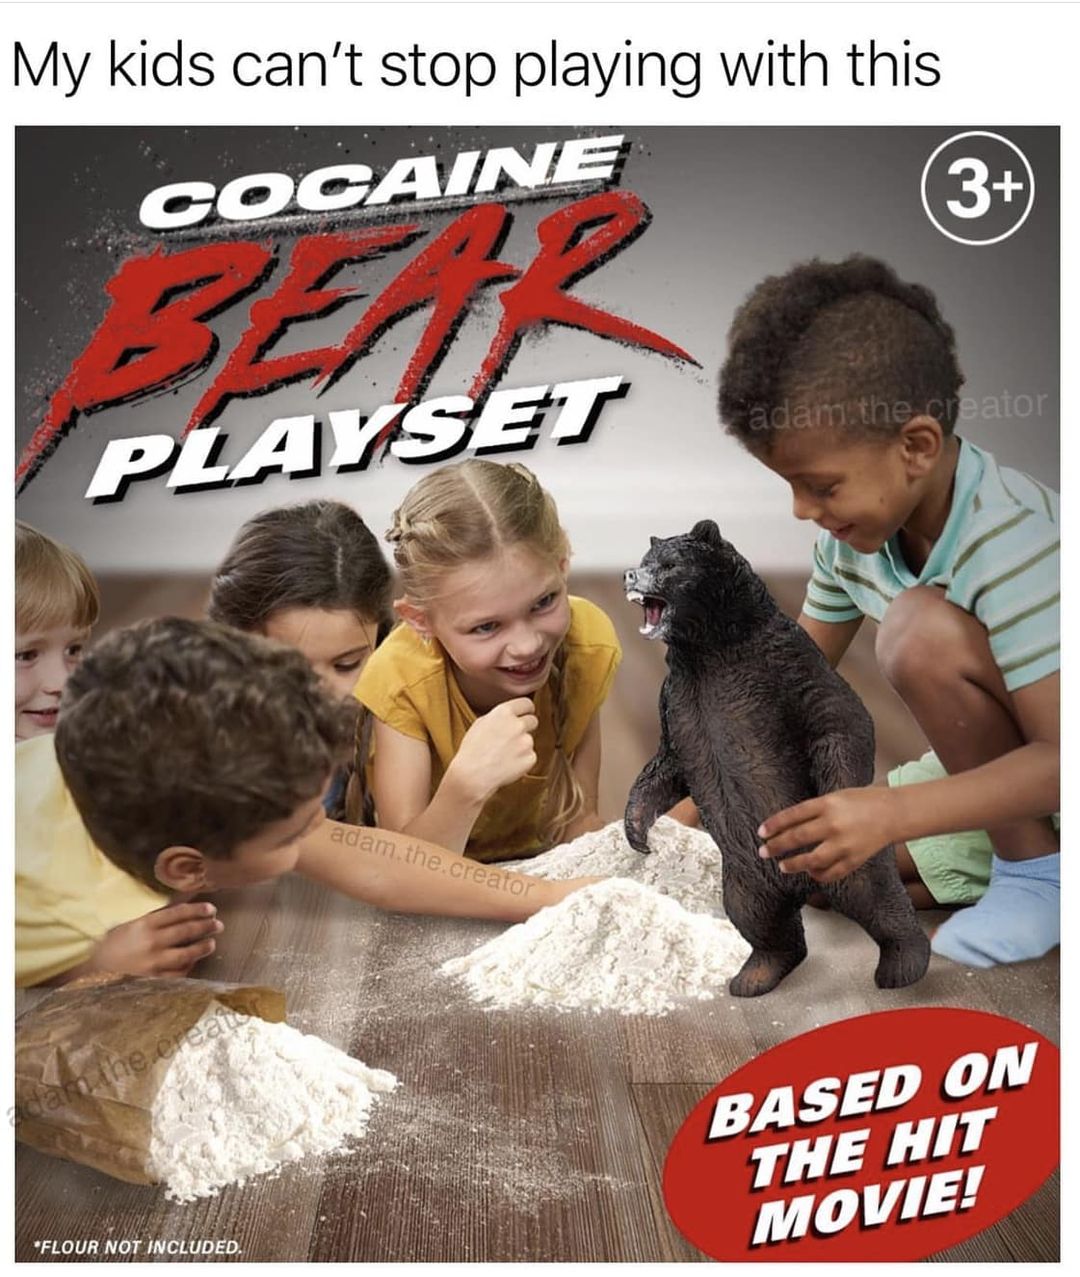 monday morning randomness -  photo caption - My kids can't stop playing with this Cocaine Bear Playset dam the creator "Flour Not Included. adam.the creator 3 adam the creator Based On The Hit Movie!